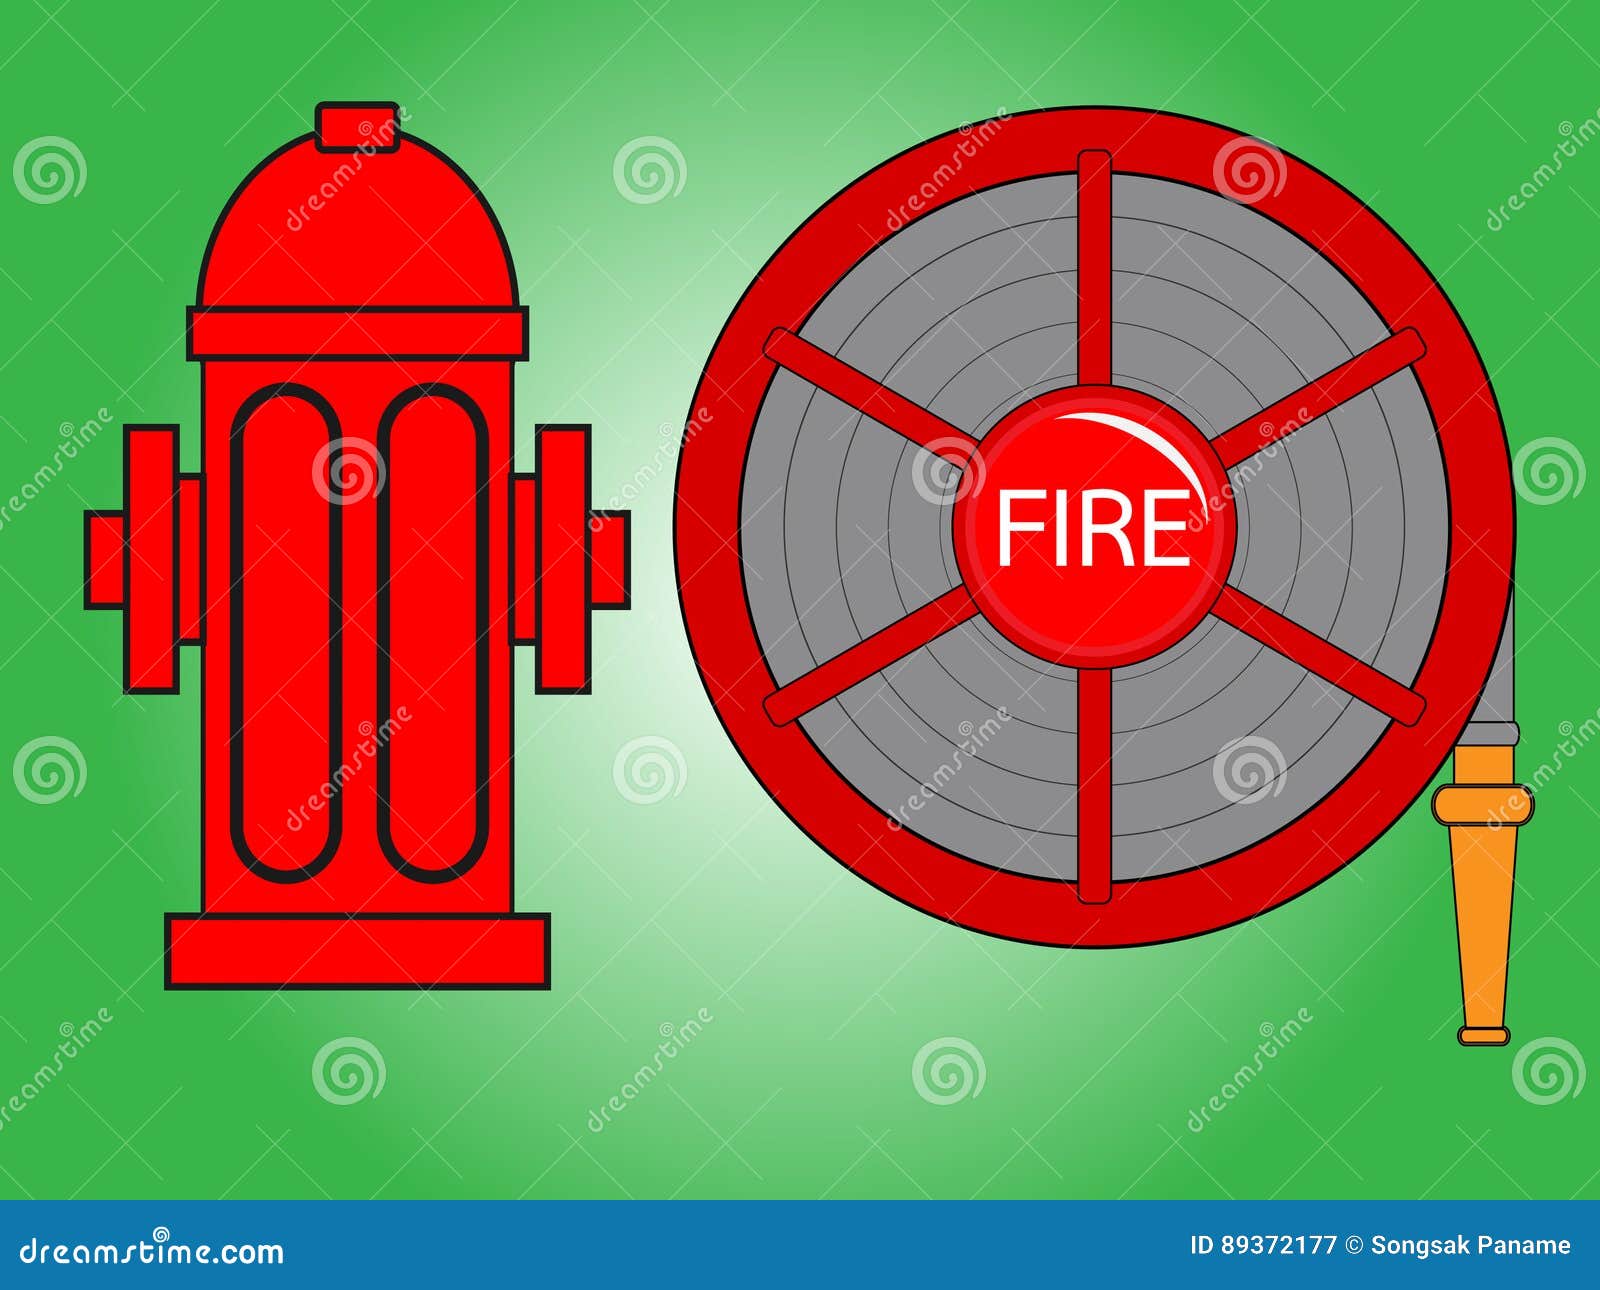 Fire Hose Reel and Fire Hydrant Stock Vector - Illustration of alarm,  accident: 89372177